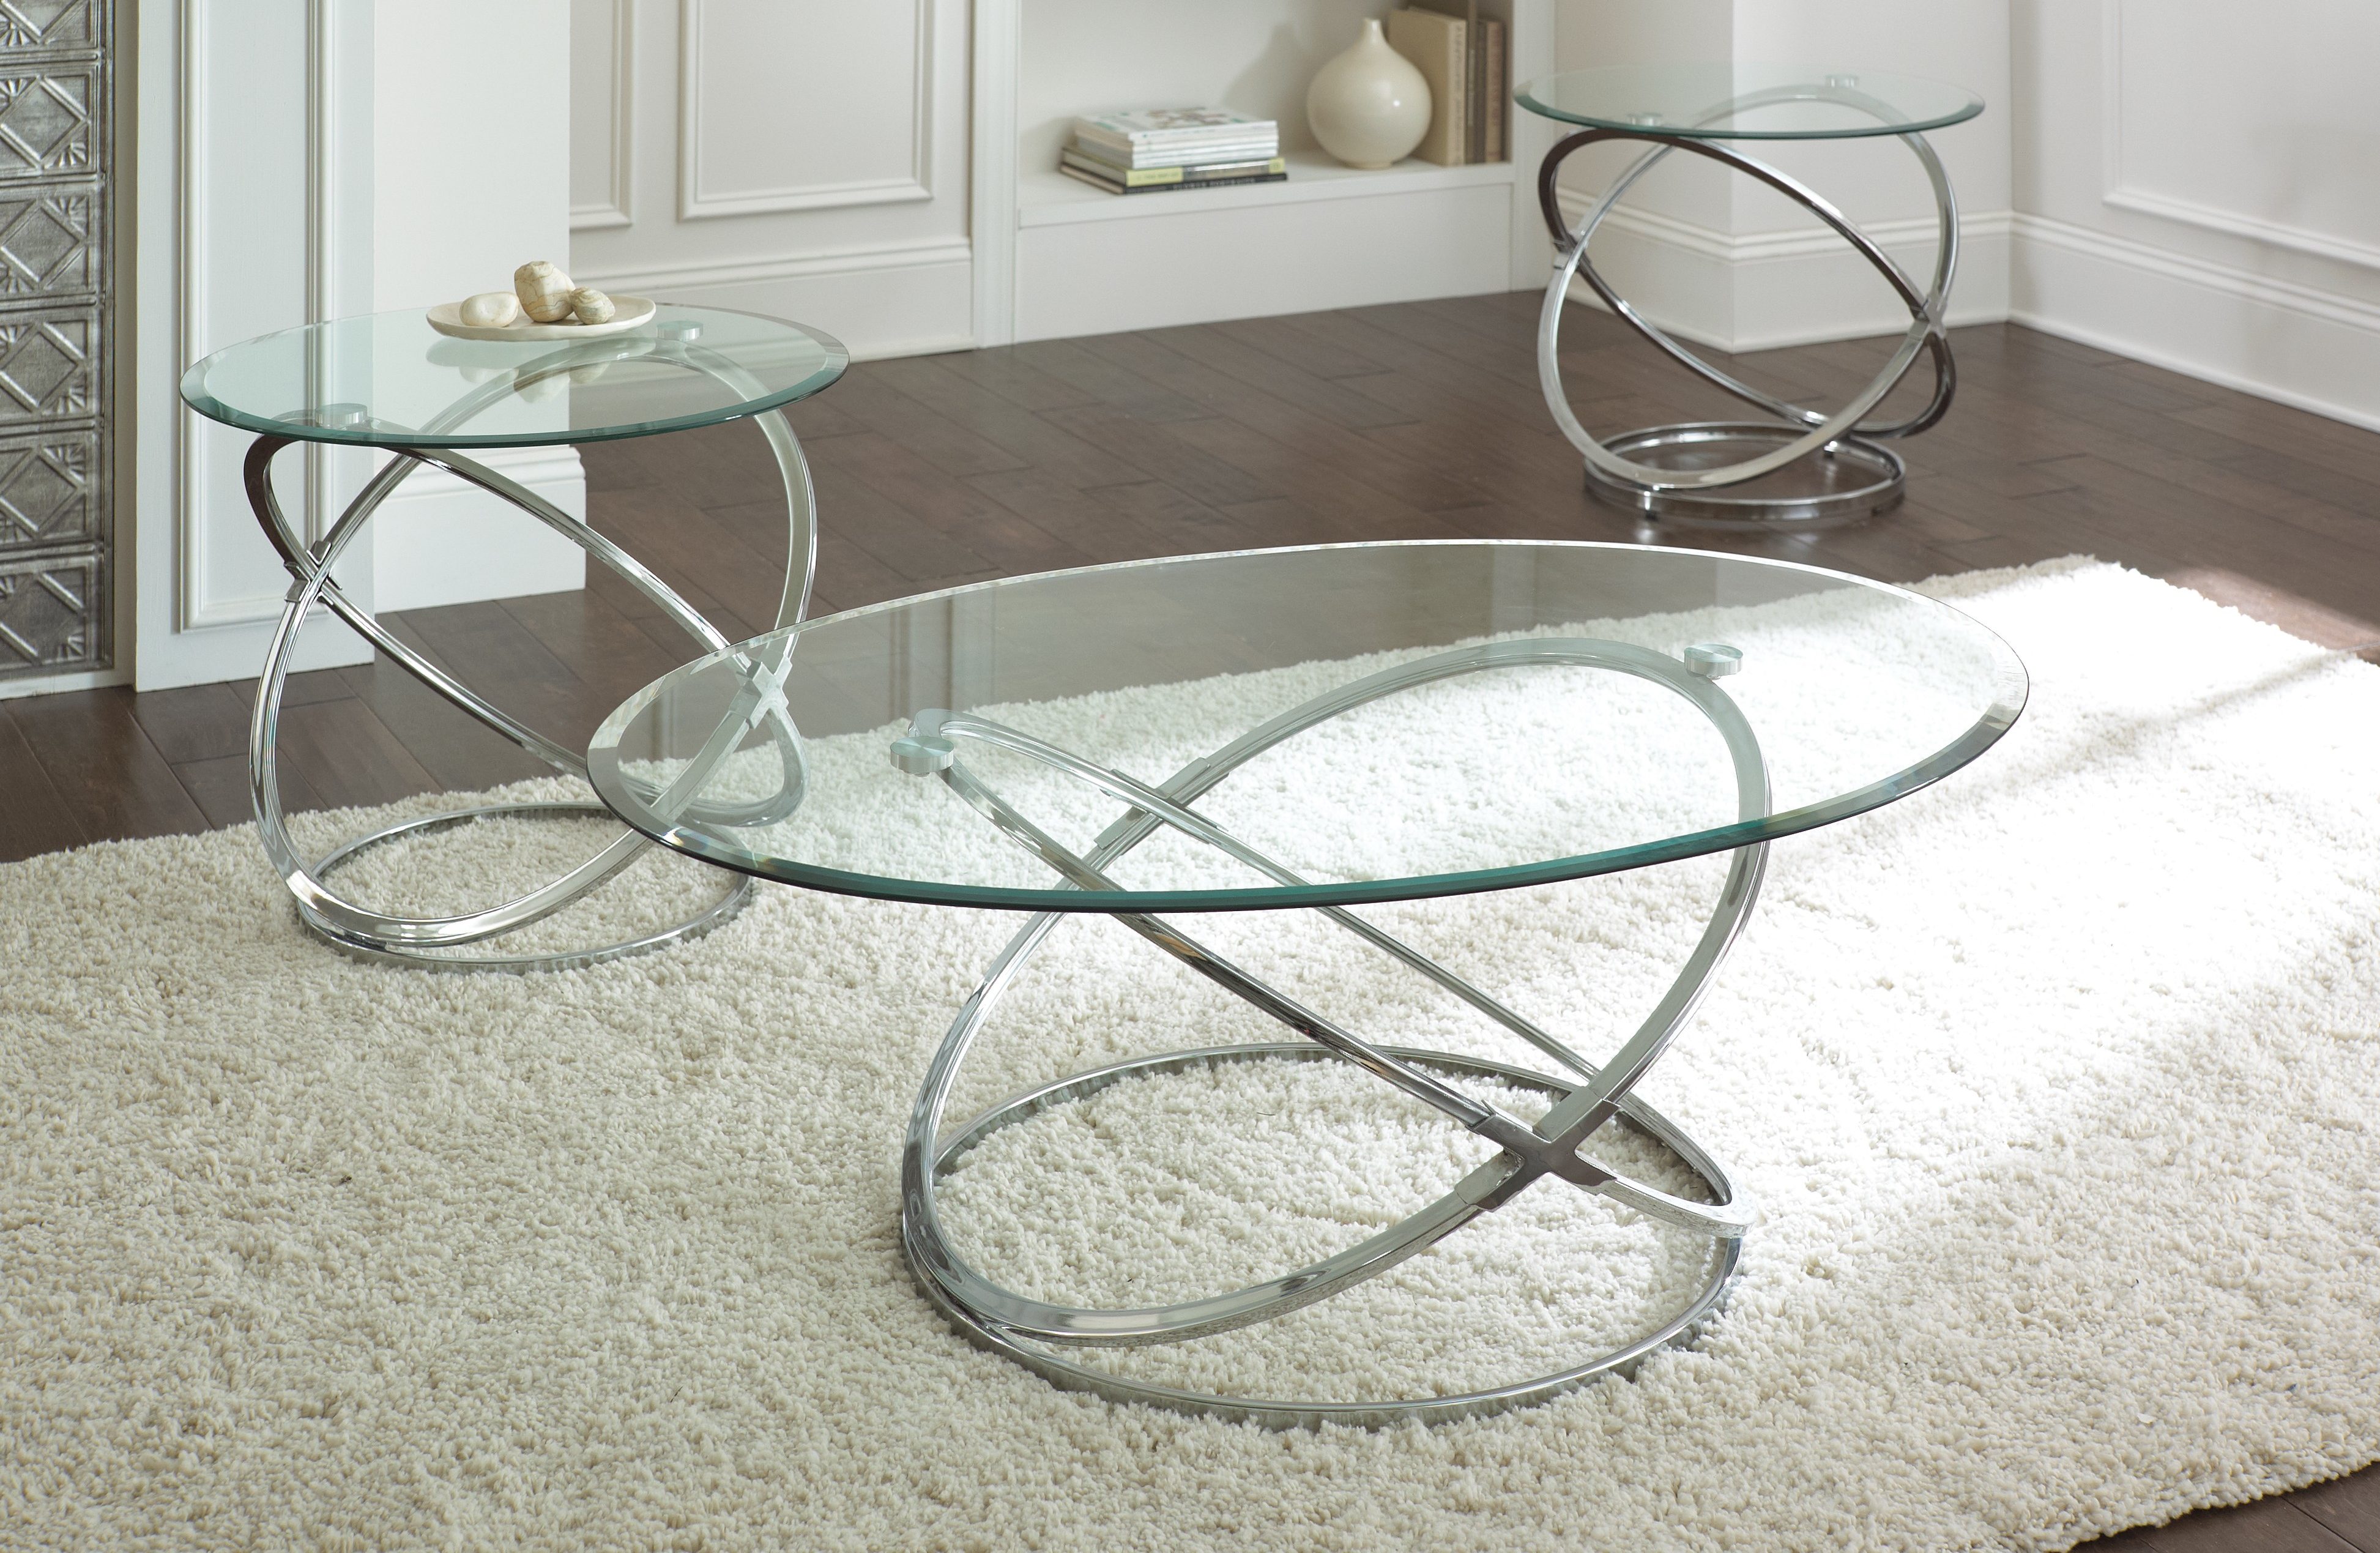 Glass coffee table in room